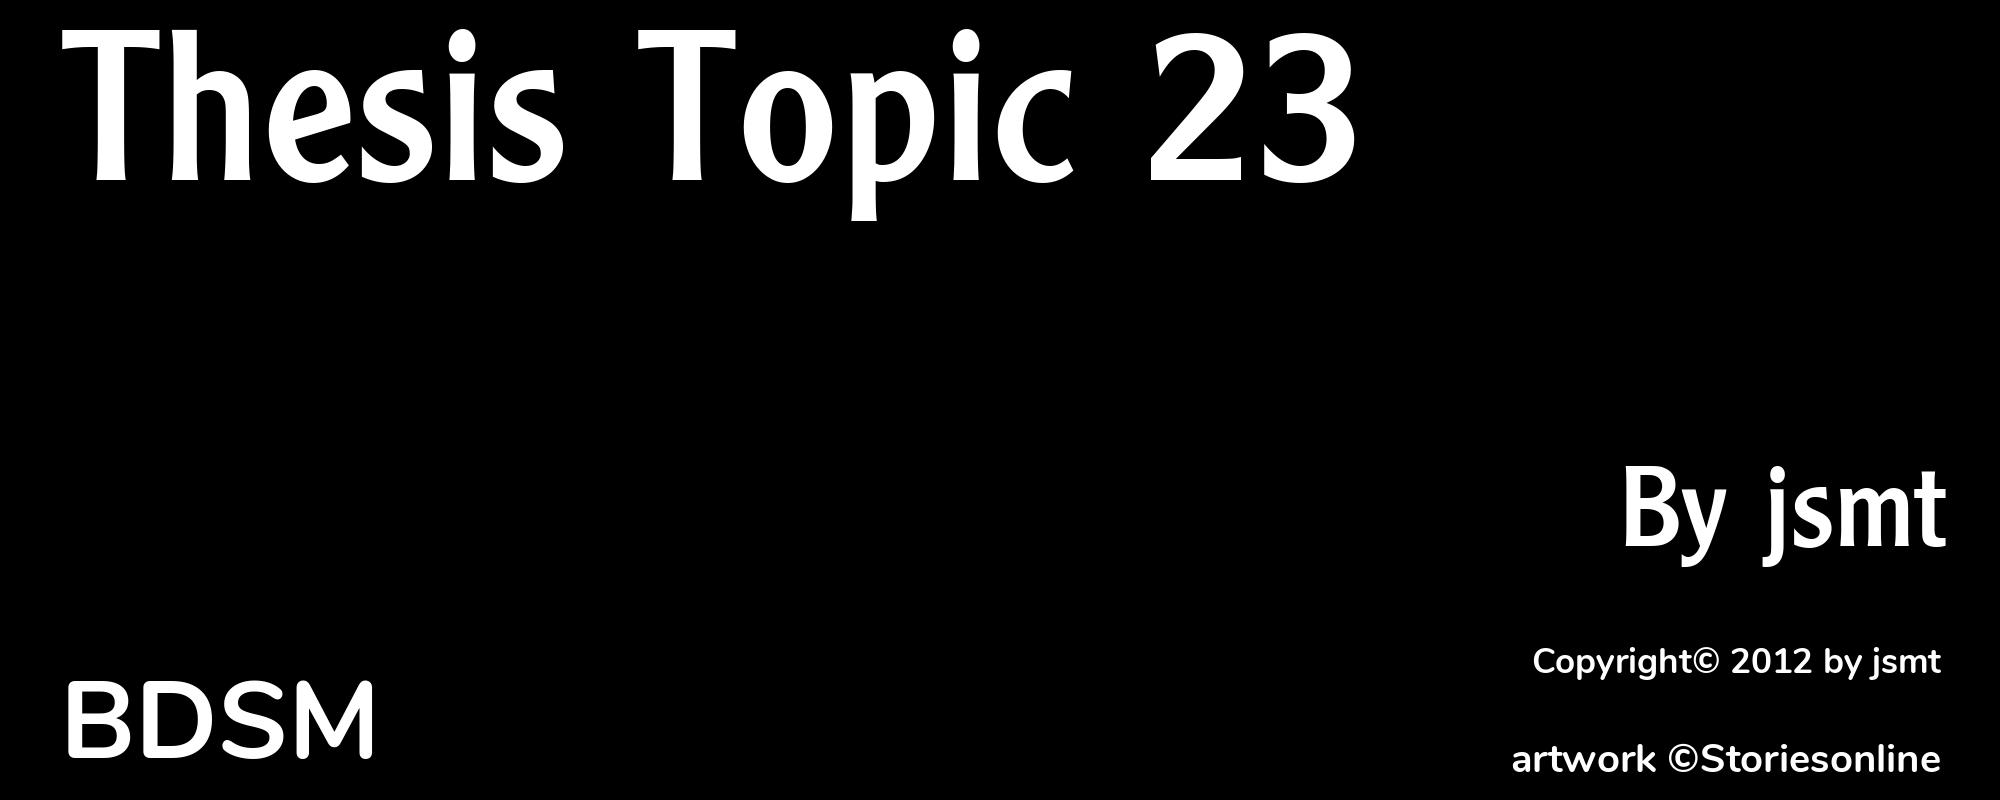 Thesis Topic 23 - Cover